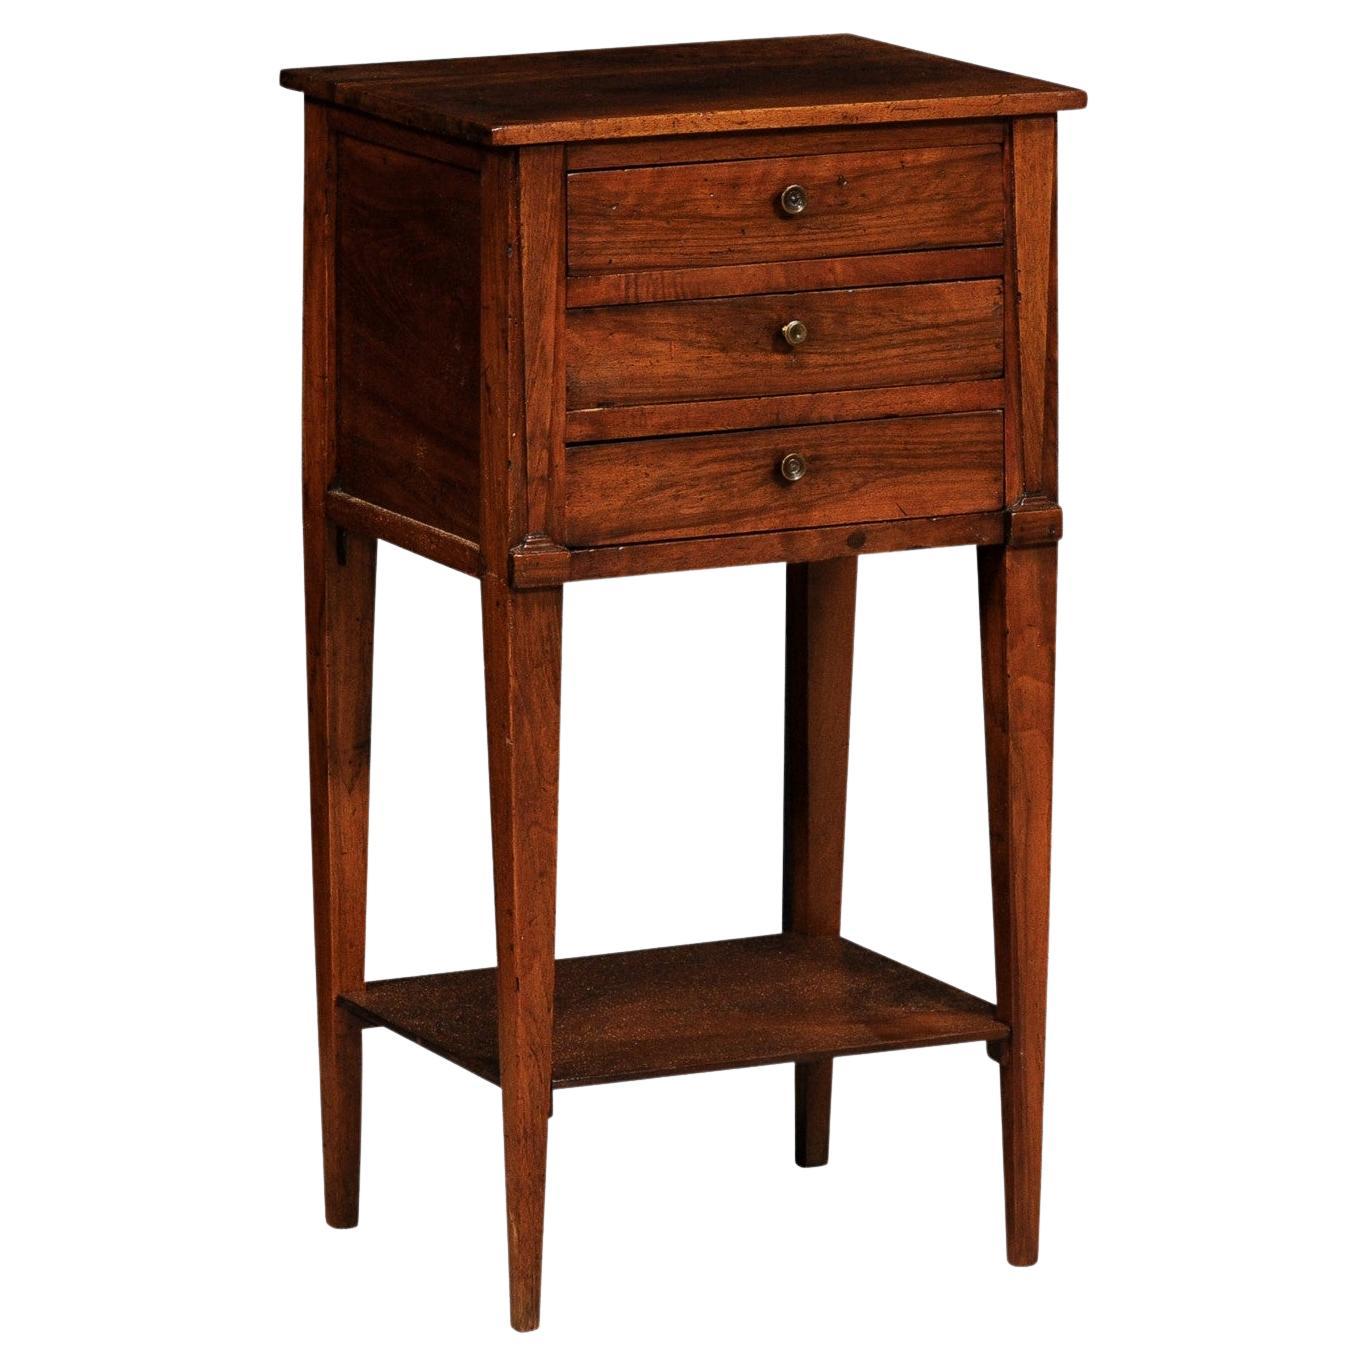 18th Century Italian Walnut Bedside Table with Three Drawers and Tapering Legs For Sale